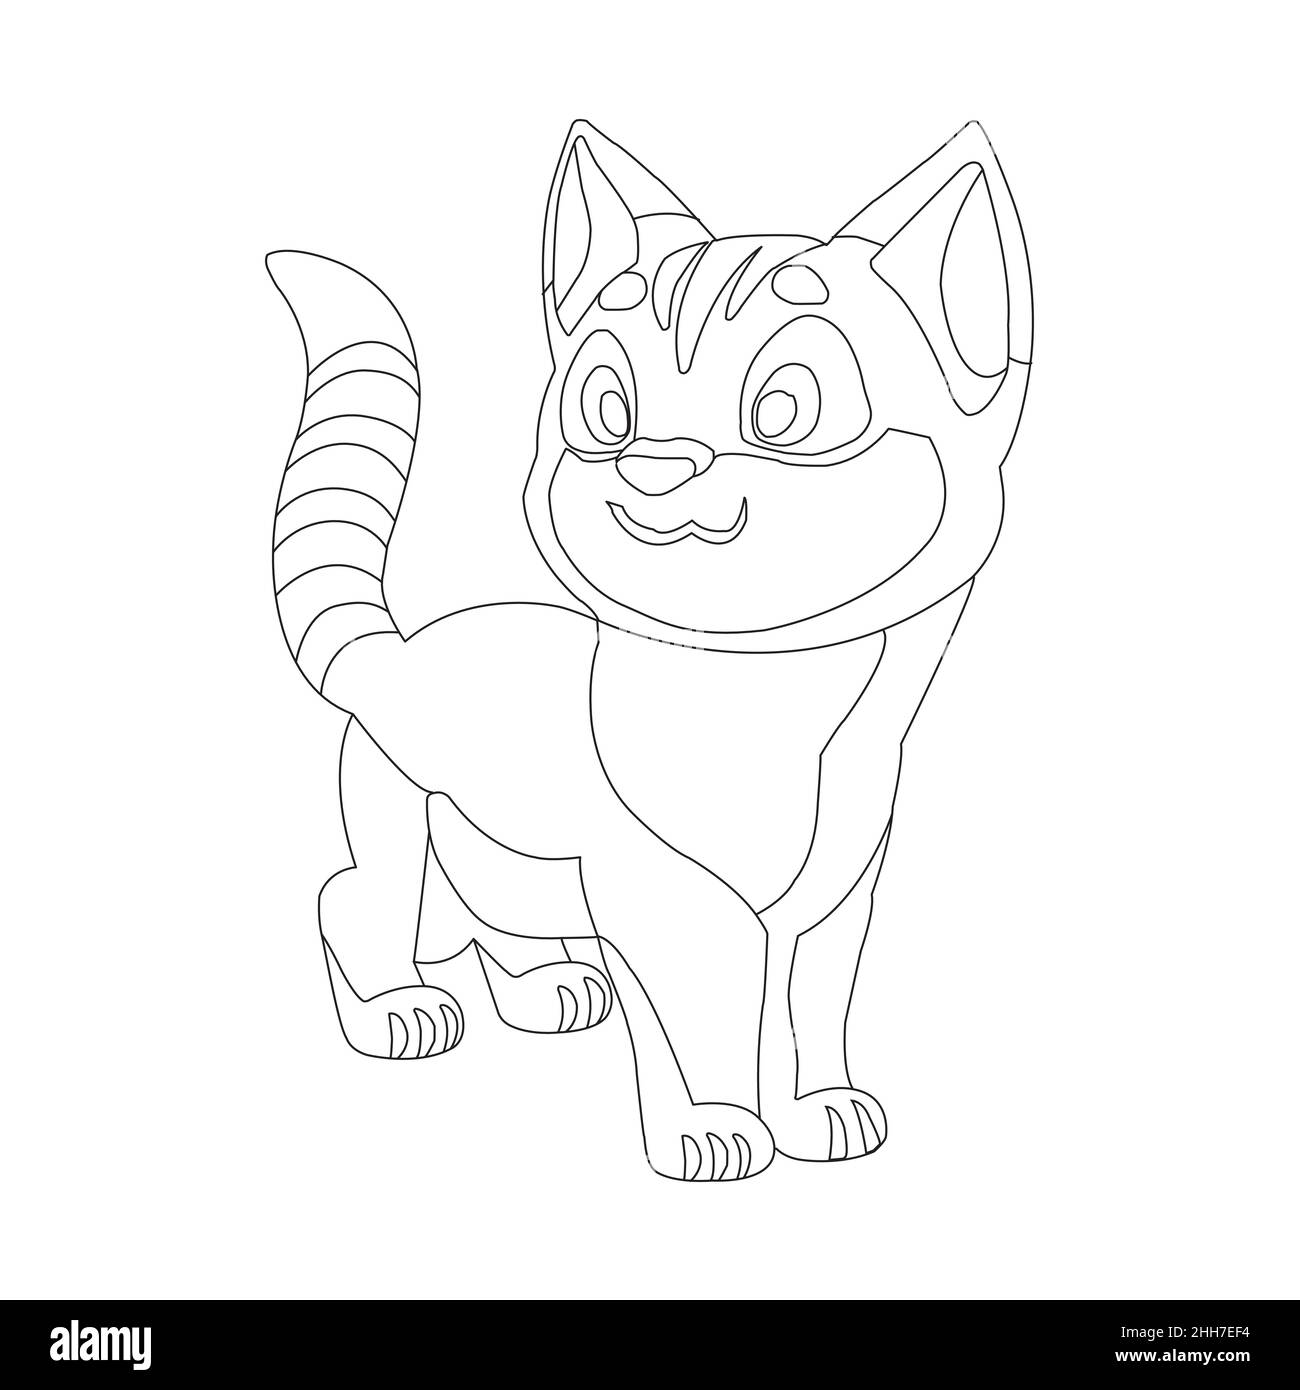 Coloring page outline of cute cat animal Coloring page cartoon vector illustration Stock Vector